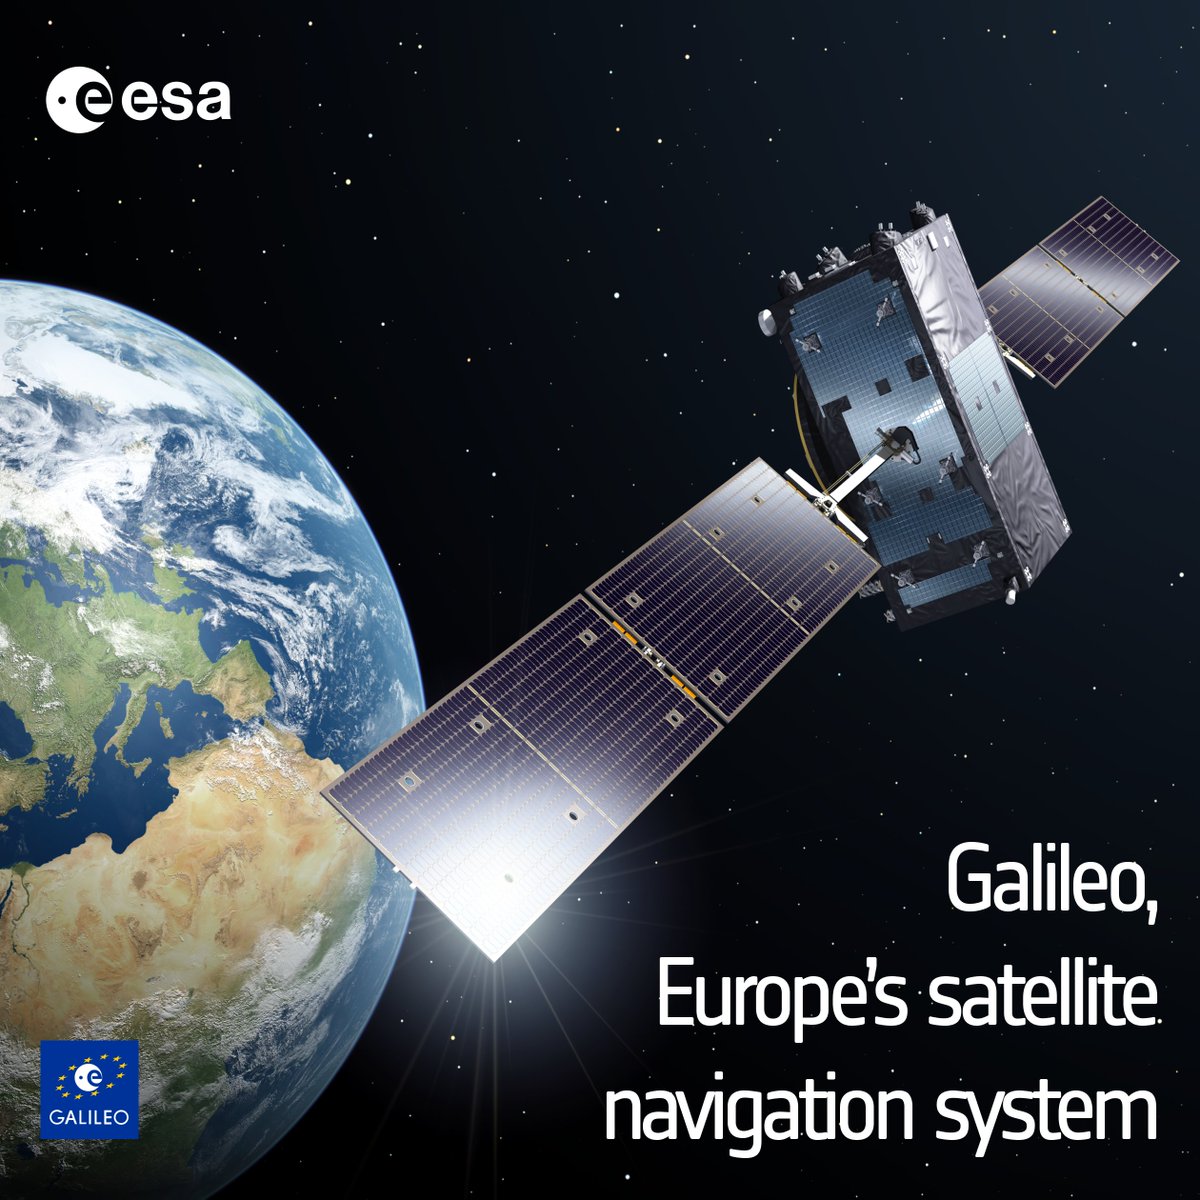 🛰️ Opening your map app used to mean waiting, but thanks to Galileo upgrades, the 'time-to-first-fix' is getting shorter and shorter. Now, even in emergency response, Galileo ensures a speedy and accurate position fix — crucial when every second counts! 🆘…